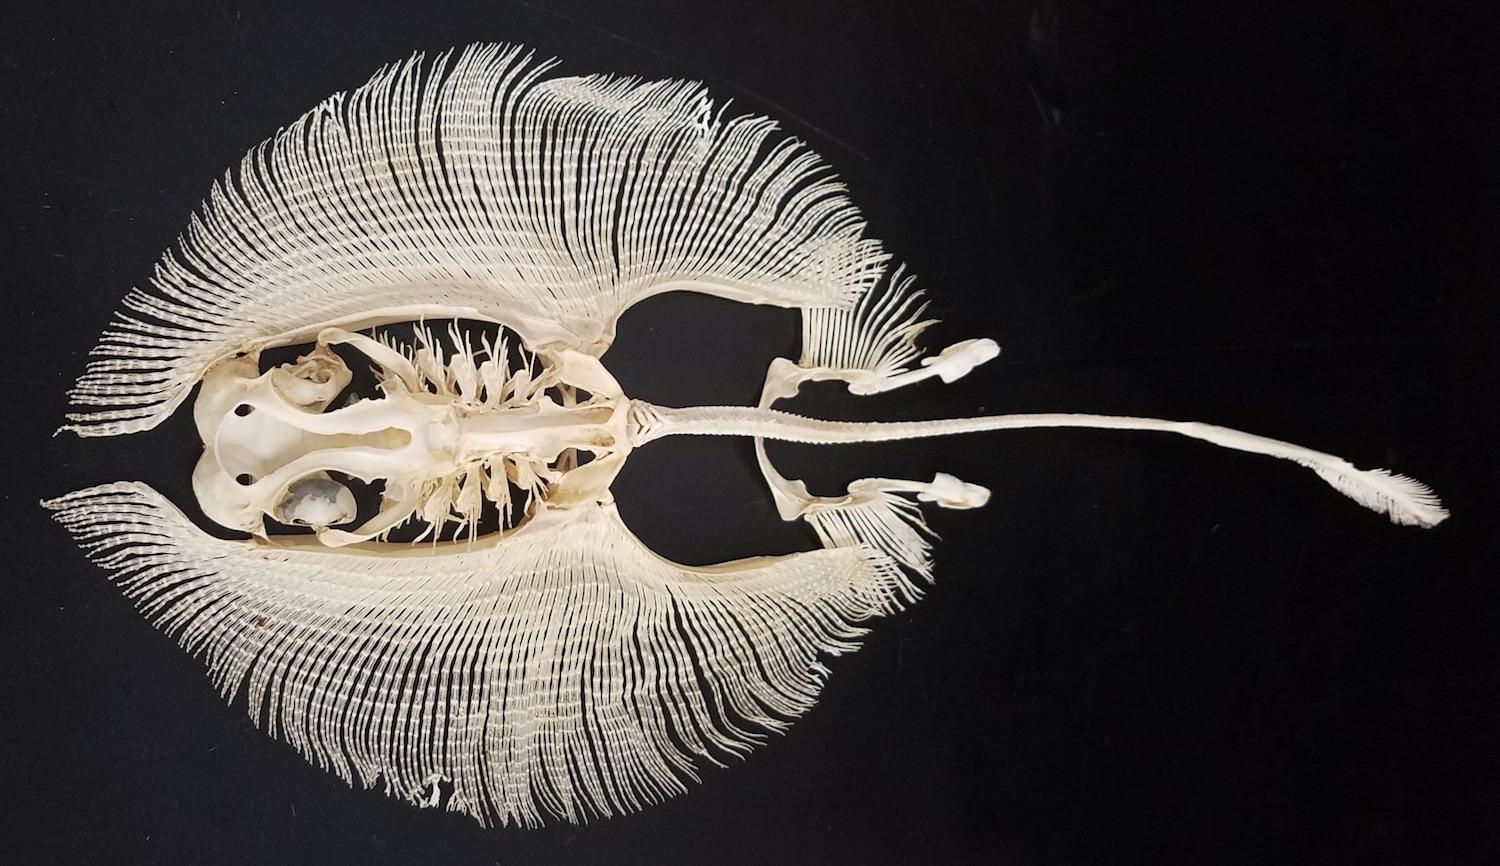 A stingray skeleton is probably one of the more interesting things you'll see today.